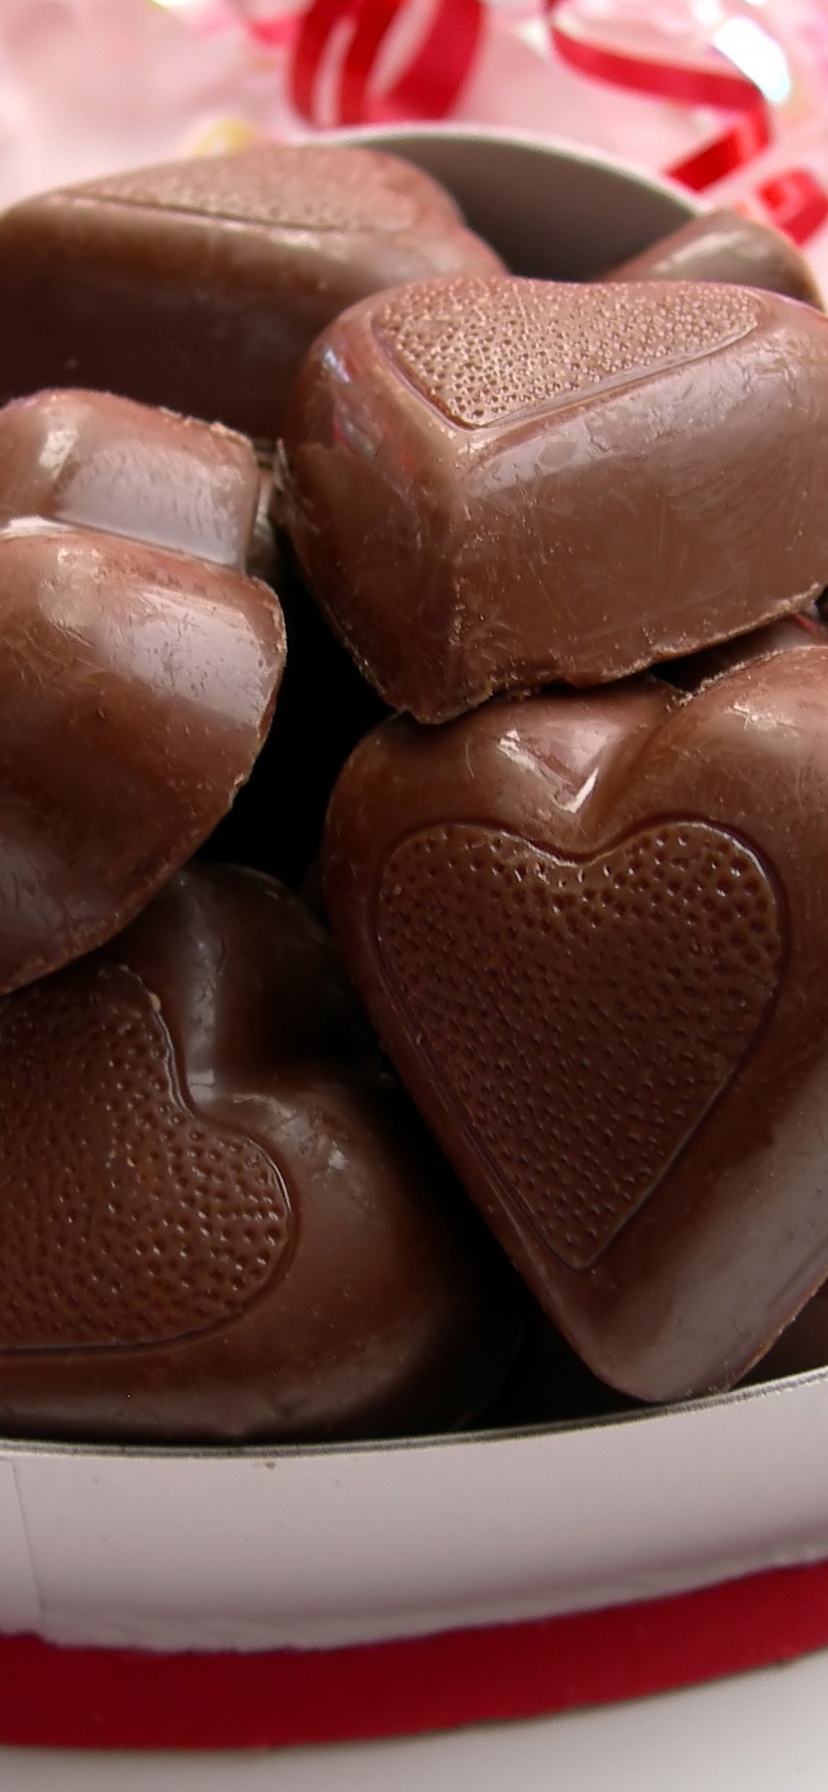 Valentines Day Chocolate Hearts